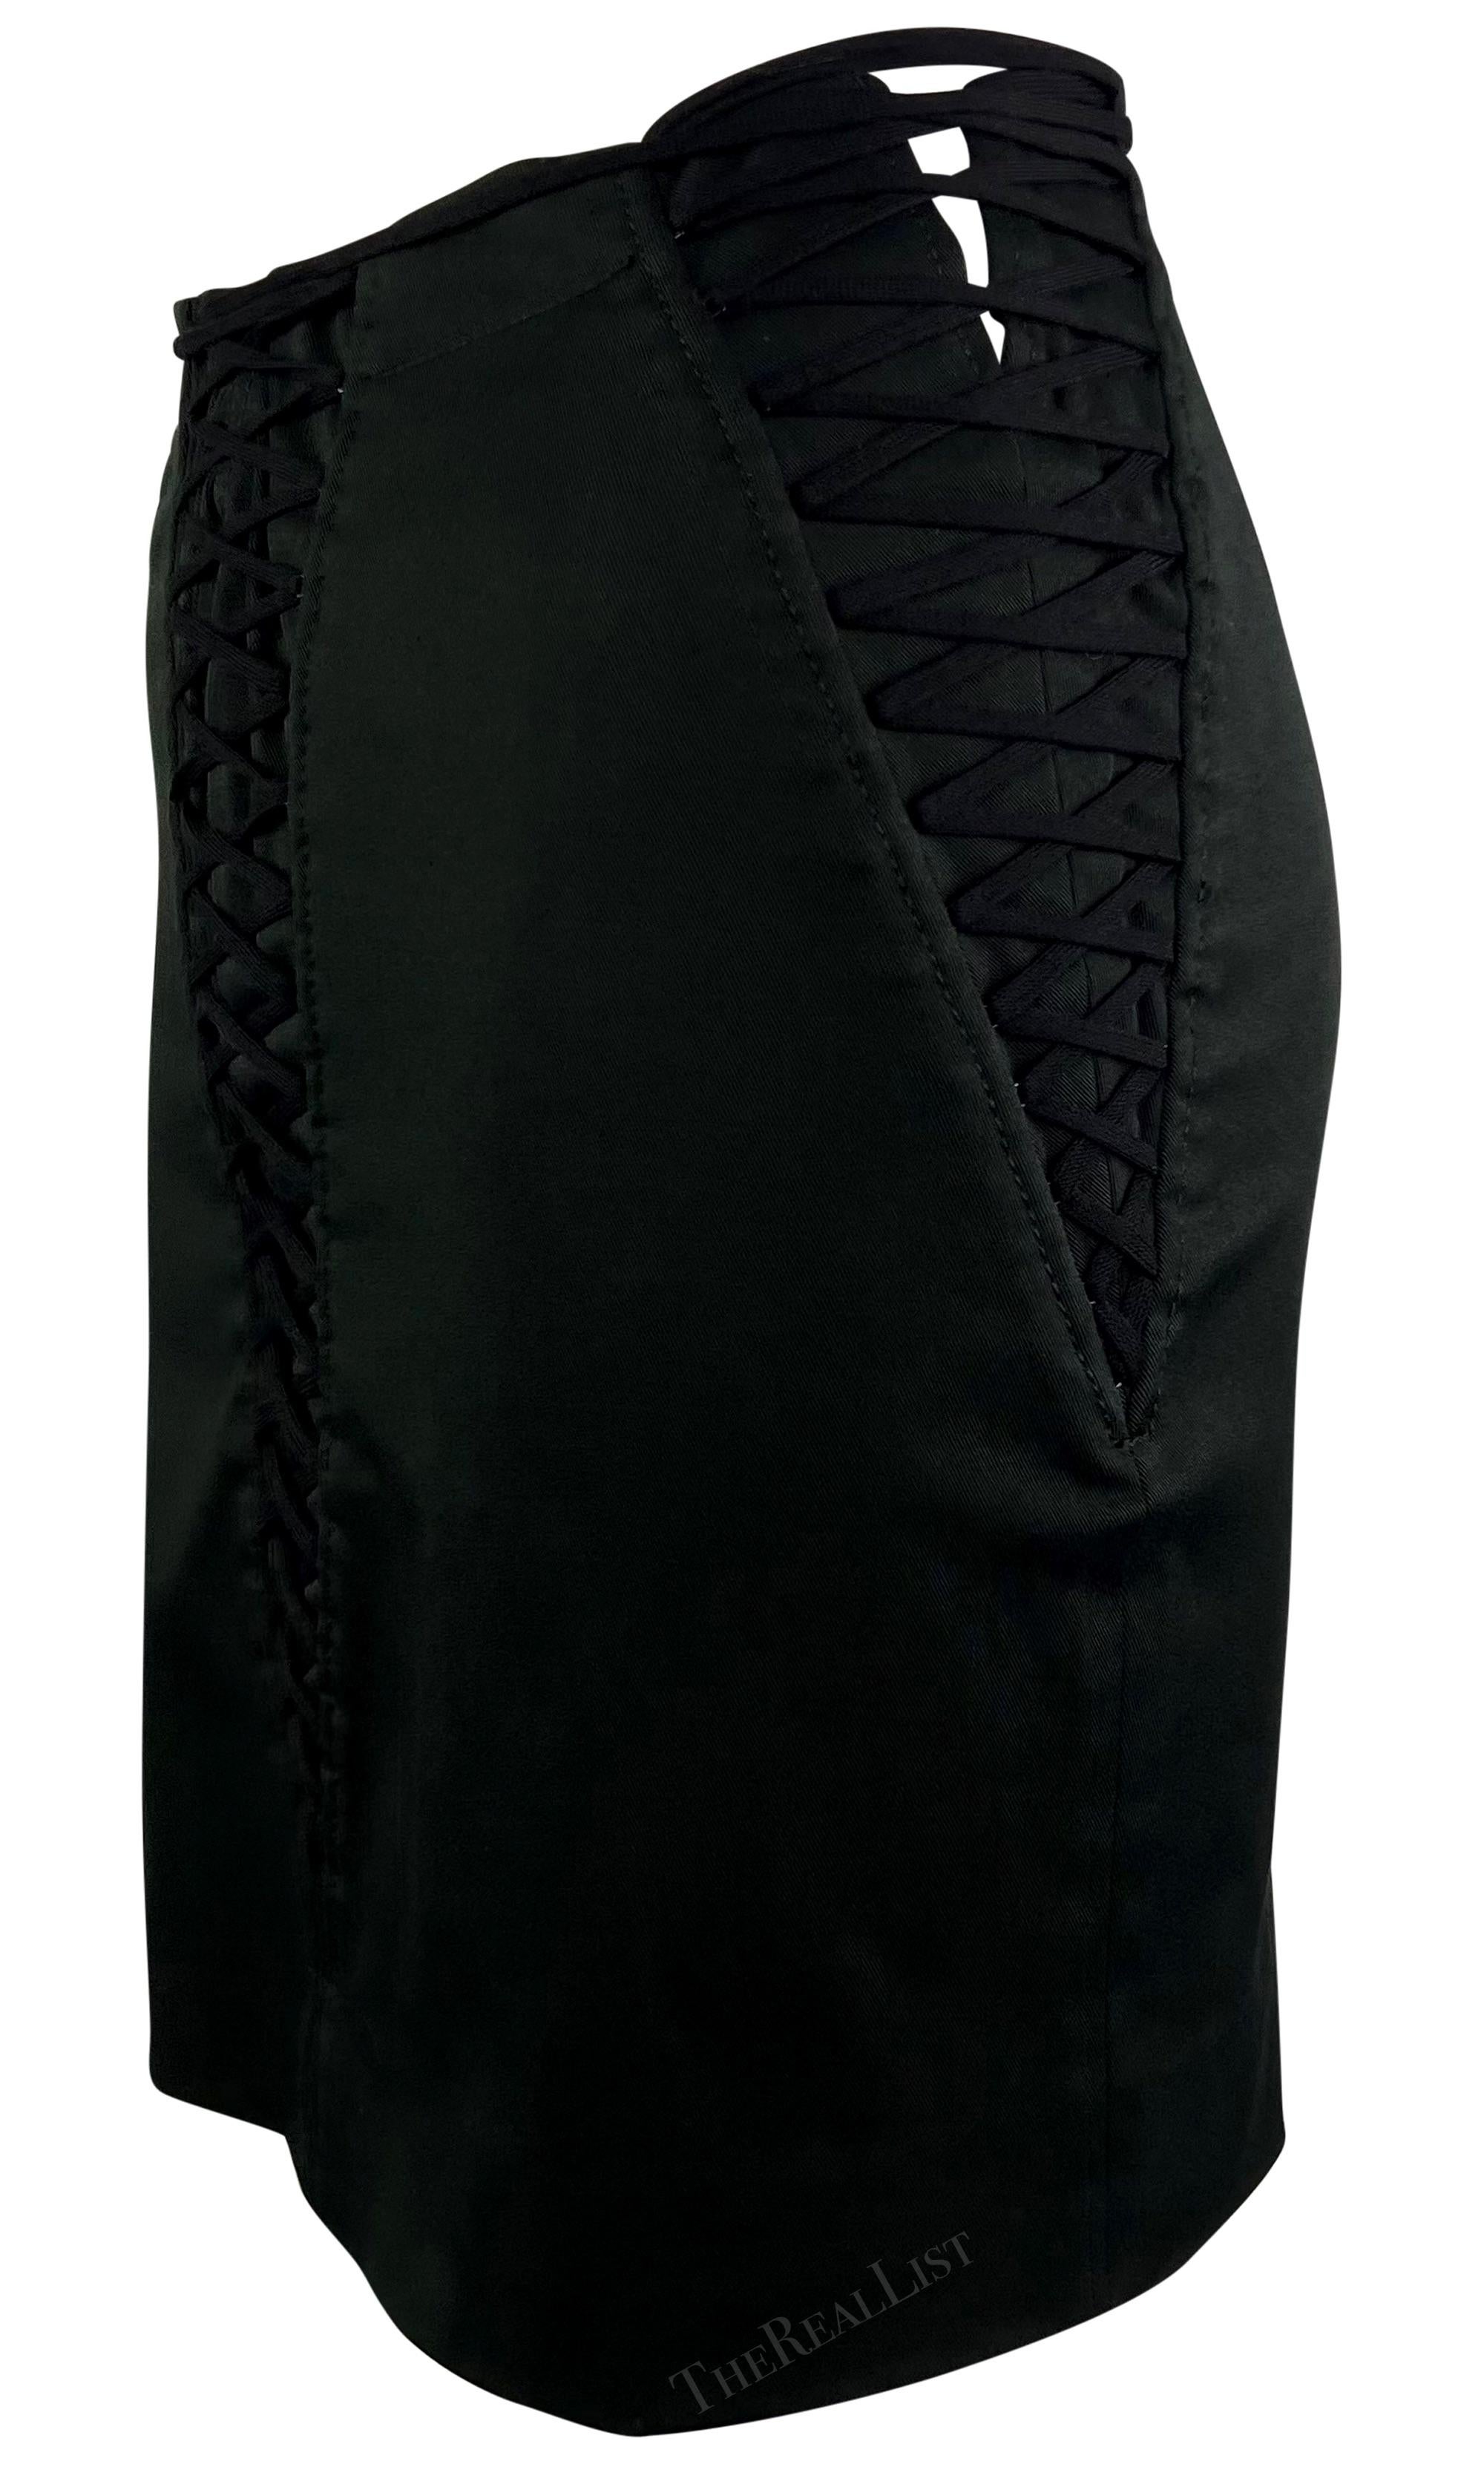 S/S 2002 Dolce & Gabbana Black Lace Up Corset-Style Mini Skirt For Sale 1